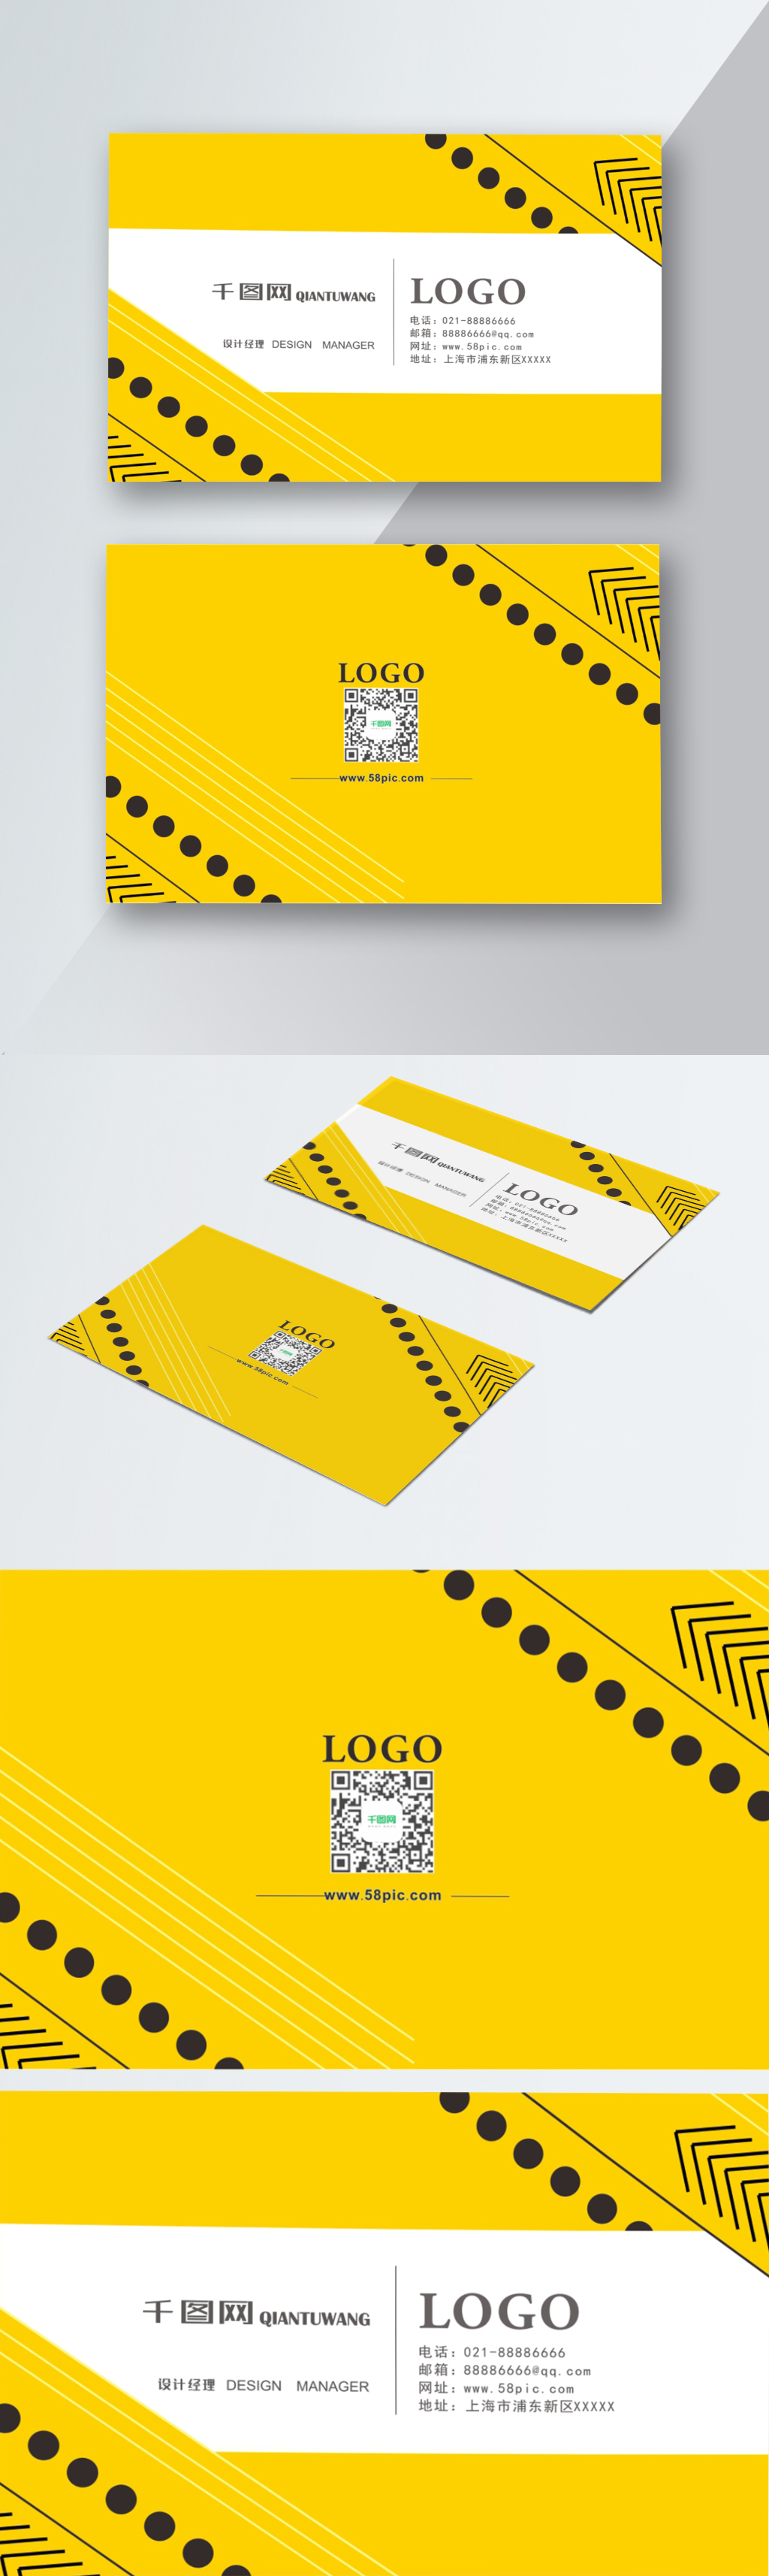 Download Yellow Creative Business Card Design Template Image Picture Free Download 400727796 Lovepik Com PSD Mockup Templates